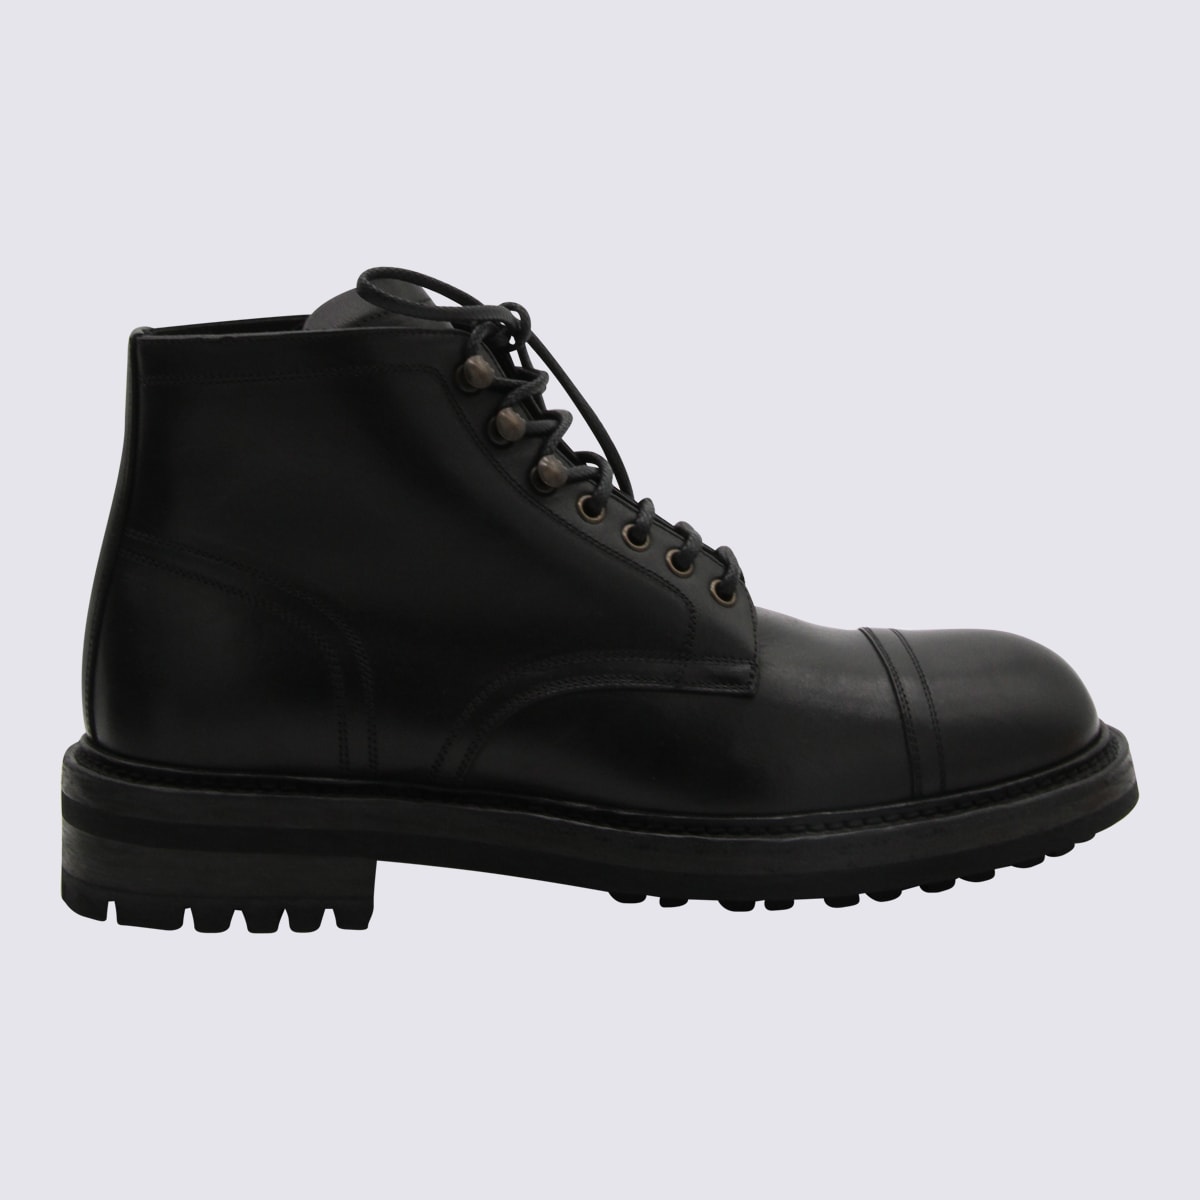 Dolce & Gabbana Black Leather Ankle Boots